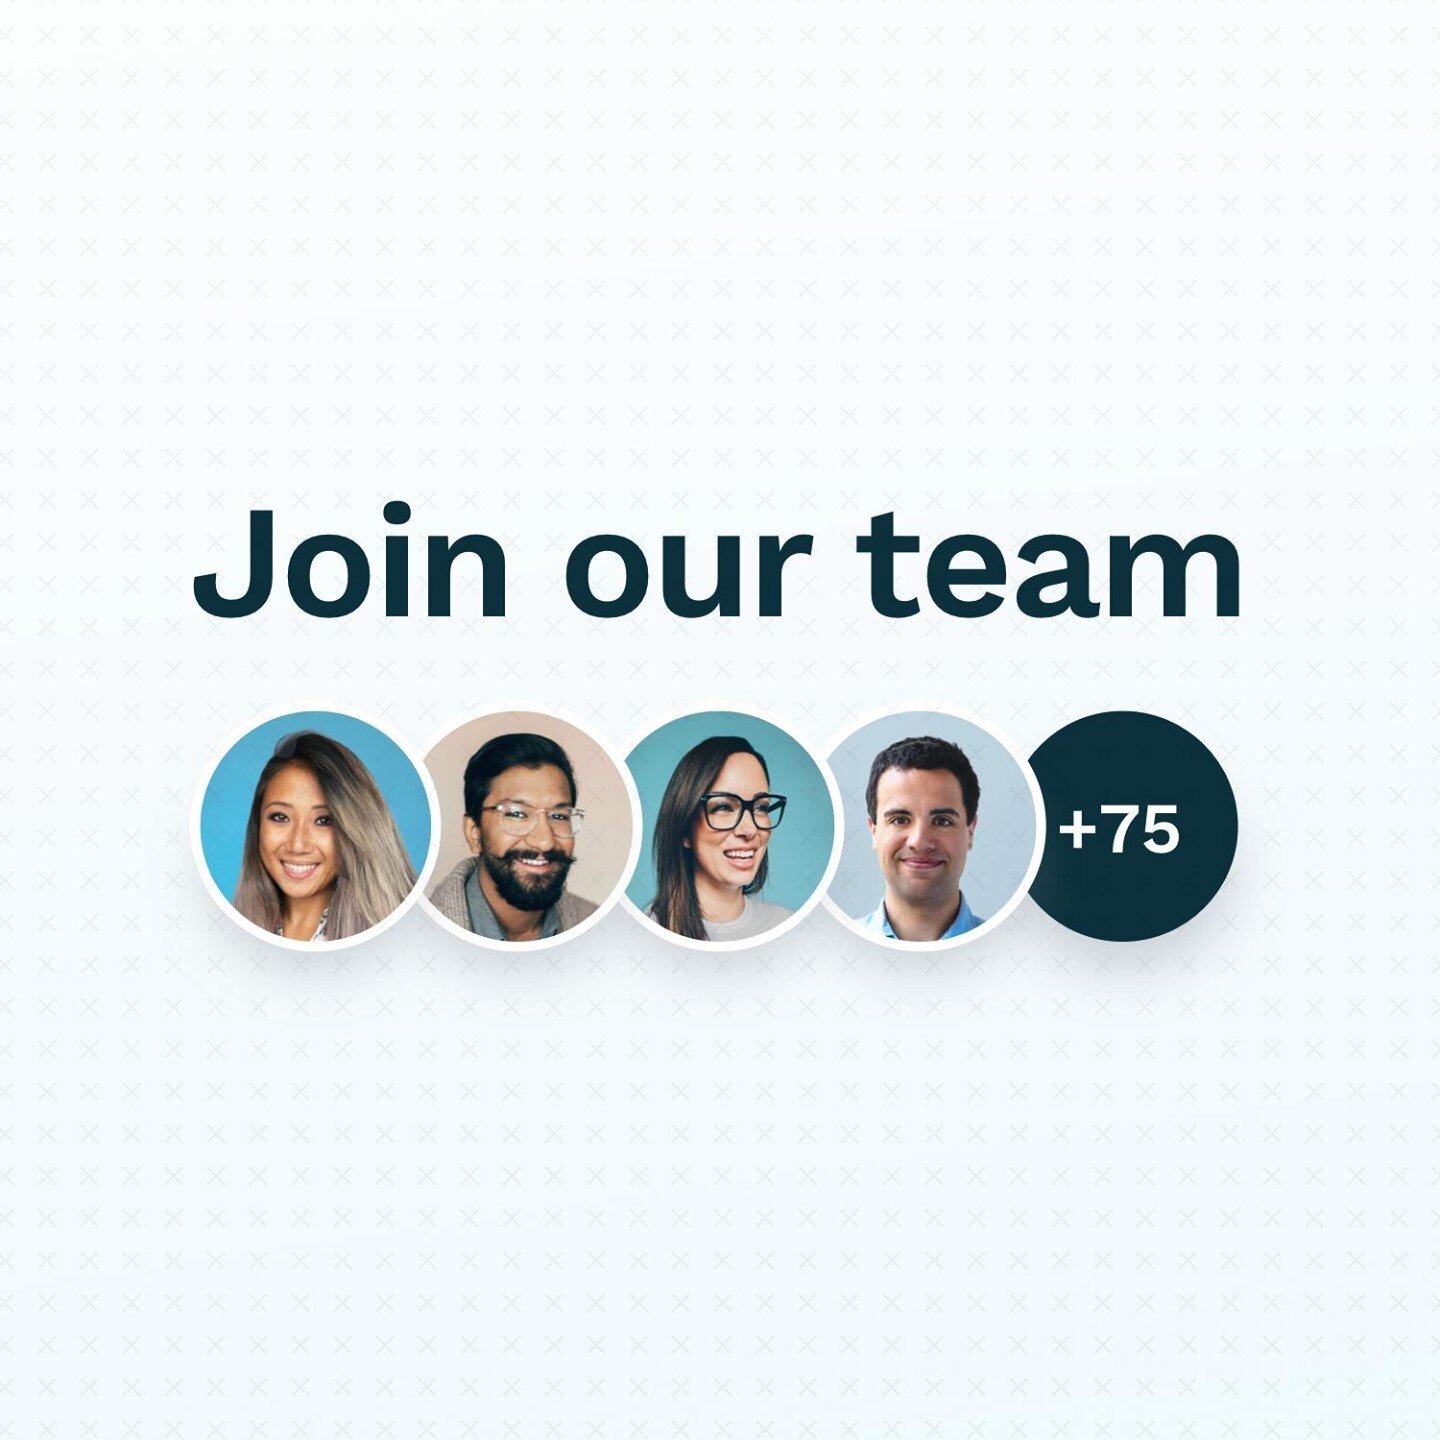 We're hiring! 🎉⠀
⠀
Want to join a team of cool #engineers working to create products that make a true impact on people's financial wellness?⠀
⠀
We're growing our engineering team here at #Sensibill and want to hear from you 👋⠀
⠀
If you're passionat